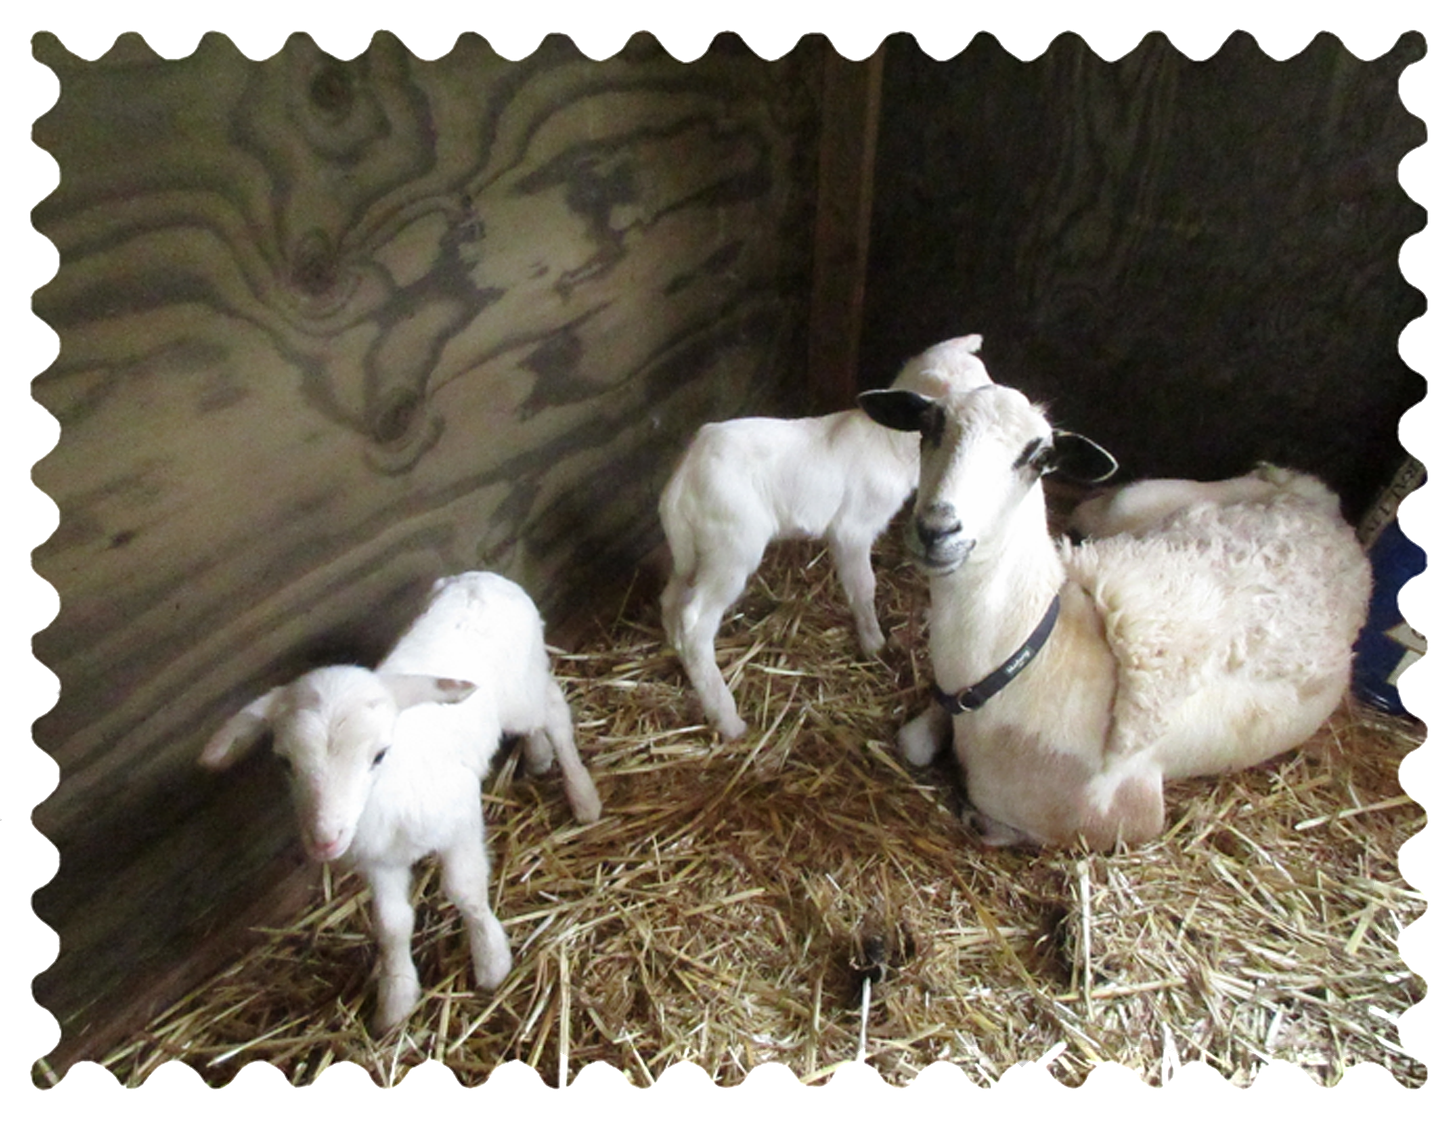 Photo of a ewe and two lambs in a wooden shelter with a straw floor.  One lamb is off to the left.  Light brown spots are visible on this lamb’s earlobes.  The ewe is facing the camera, the insides of her earlobes are black.  The second lamb is partially obscured behind the ewe.